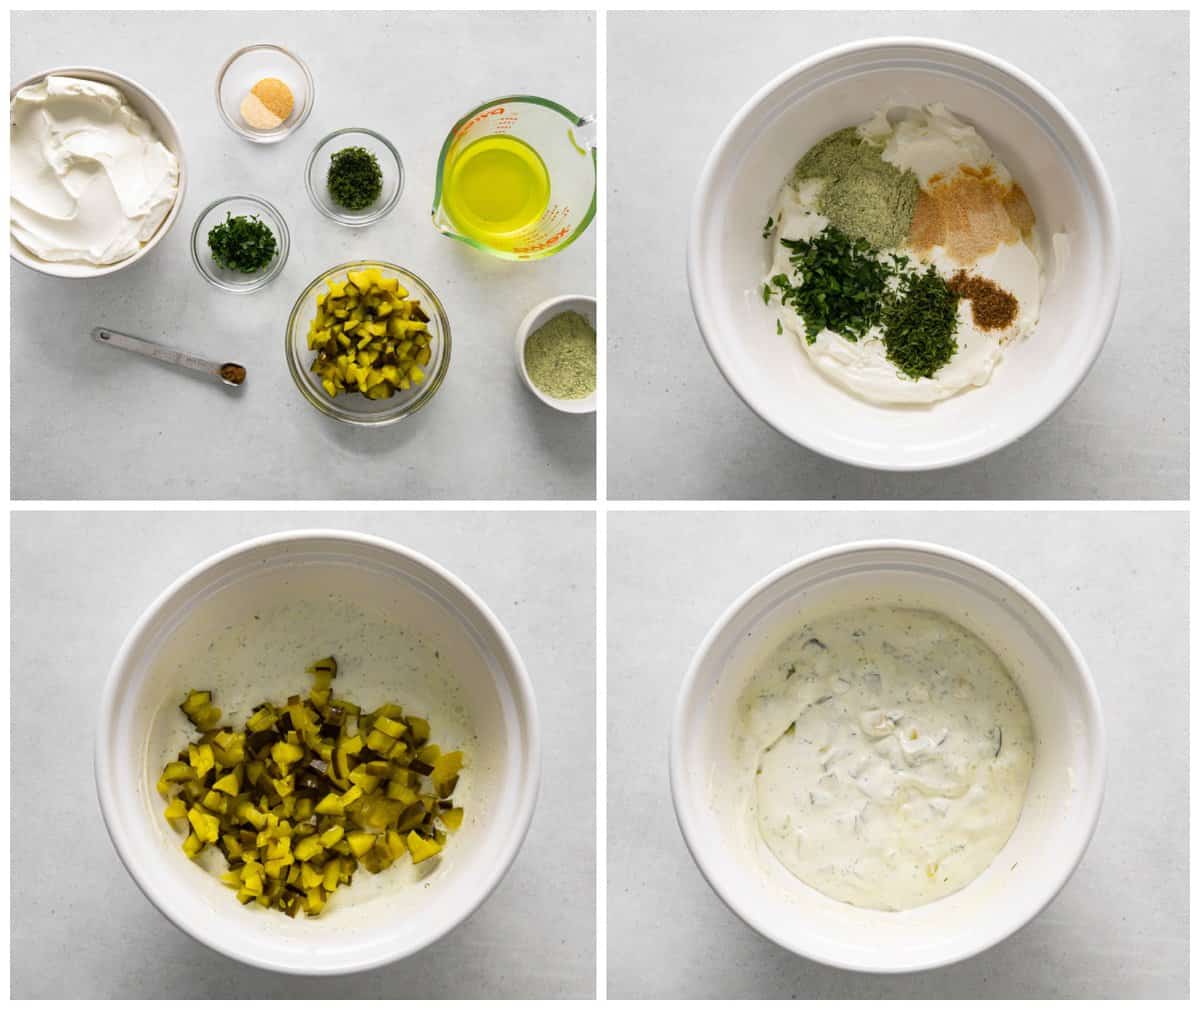 how to make ranch dill pickle dip step by step photo instructions